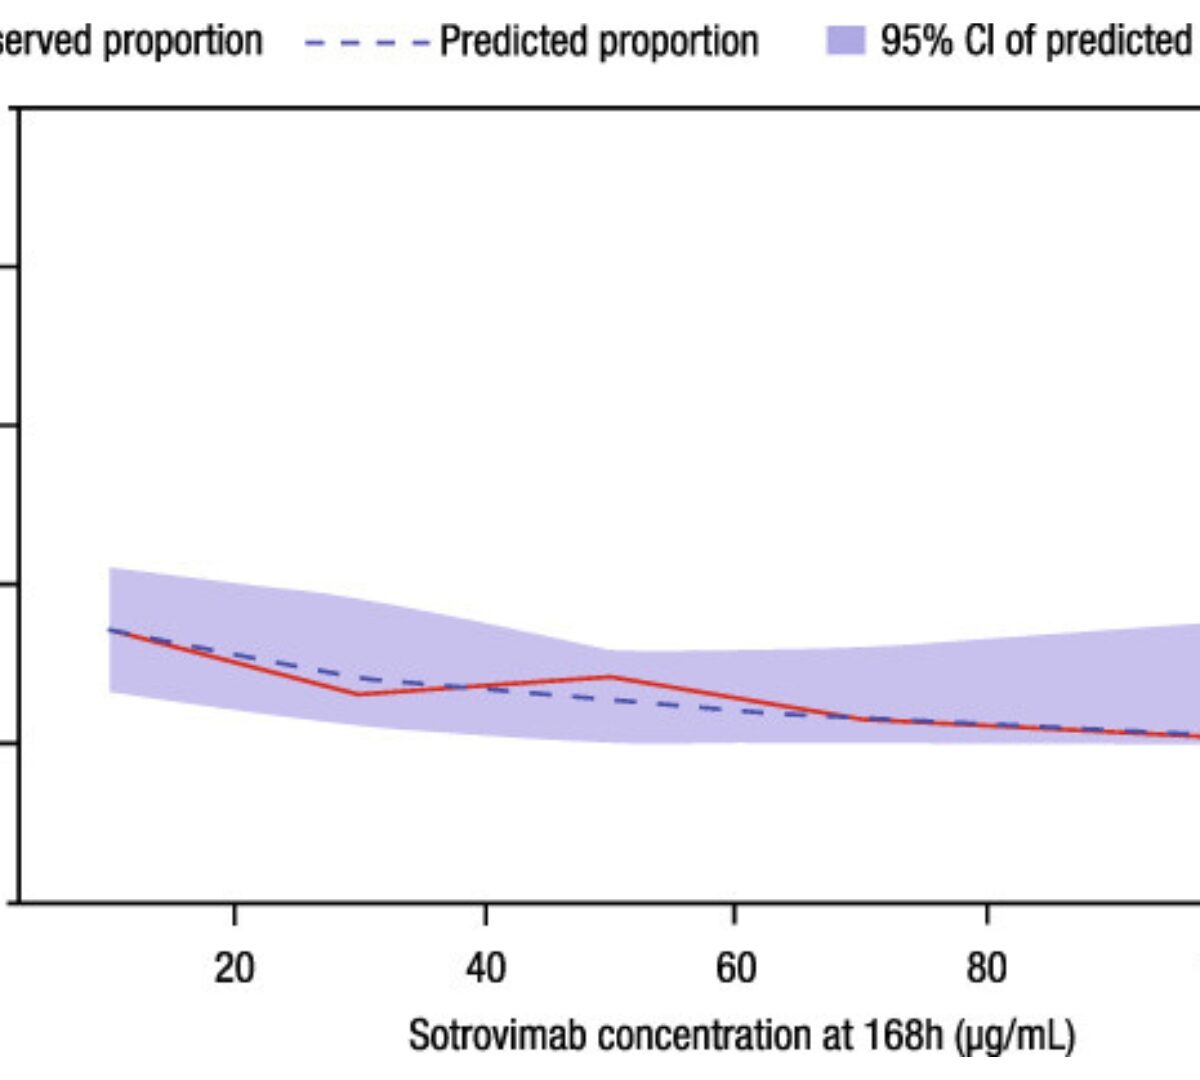 Population Pharmacokinetics and Exposure-Response Analysis of a Single Dose of Sotrovimab in the Early Treatment of Patients With Mild to Moderate COVID-19